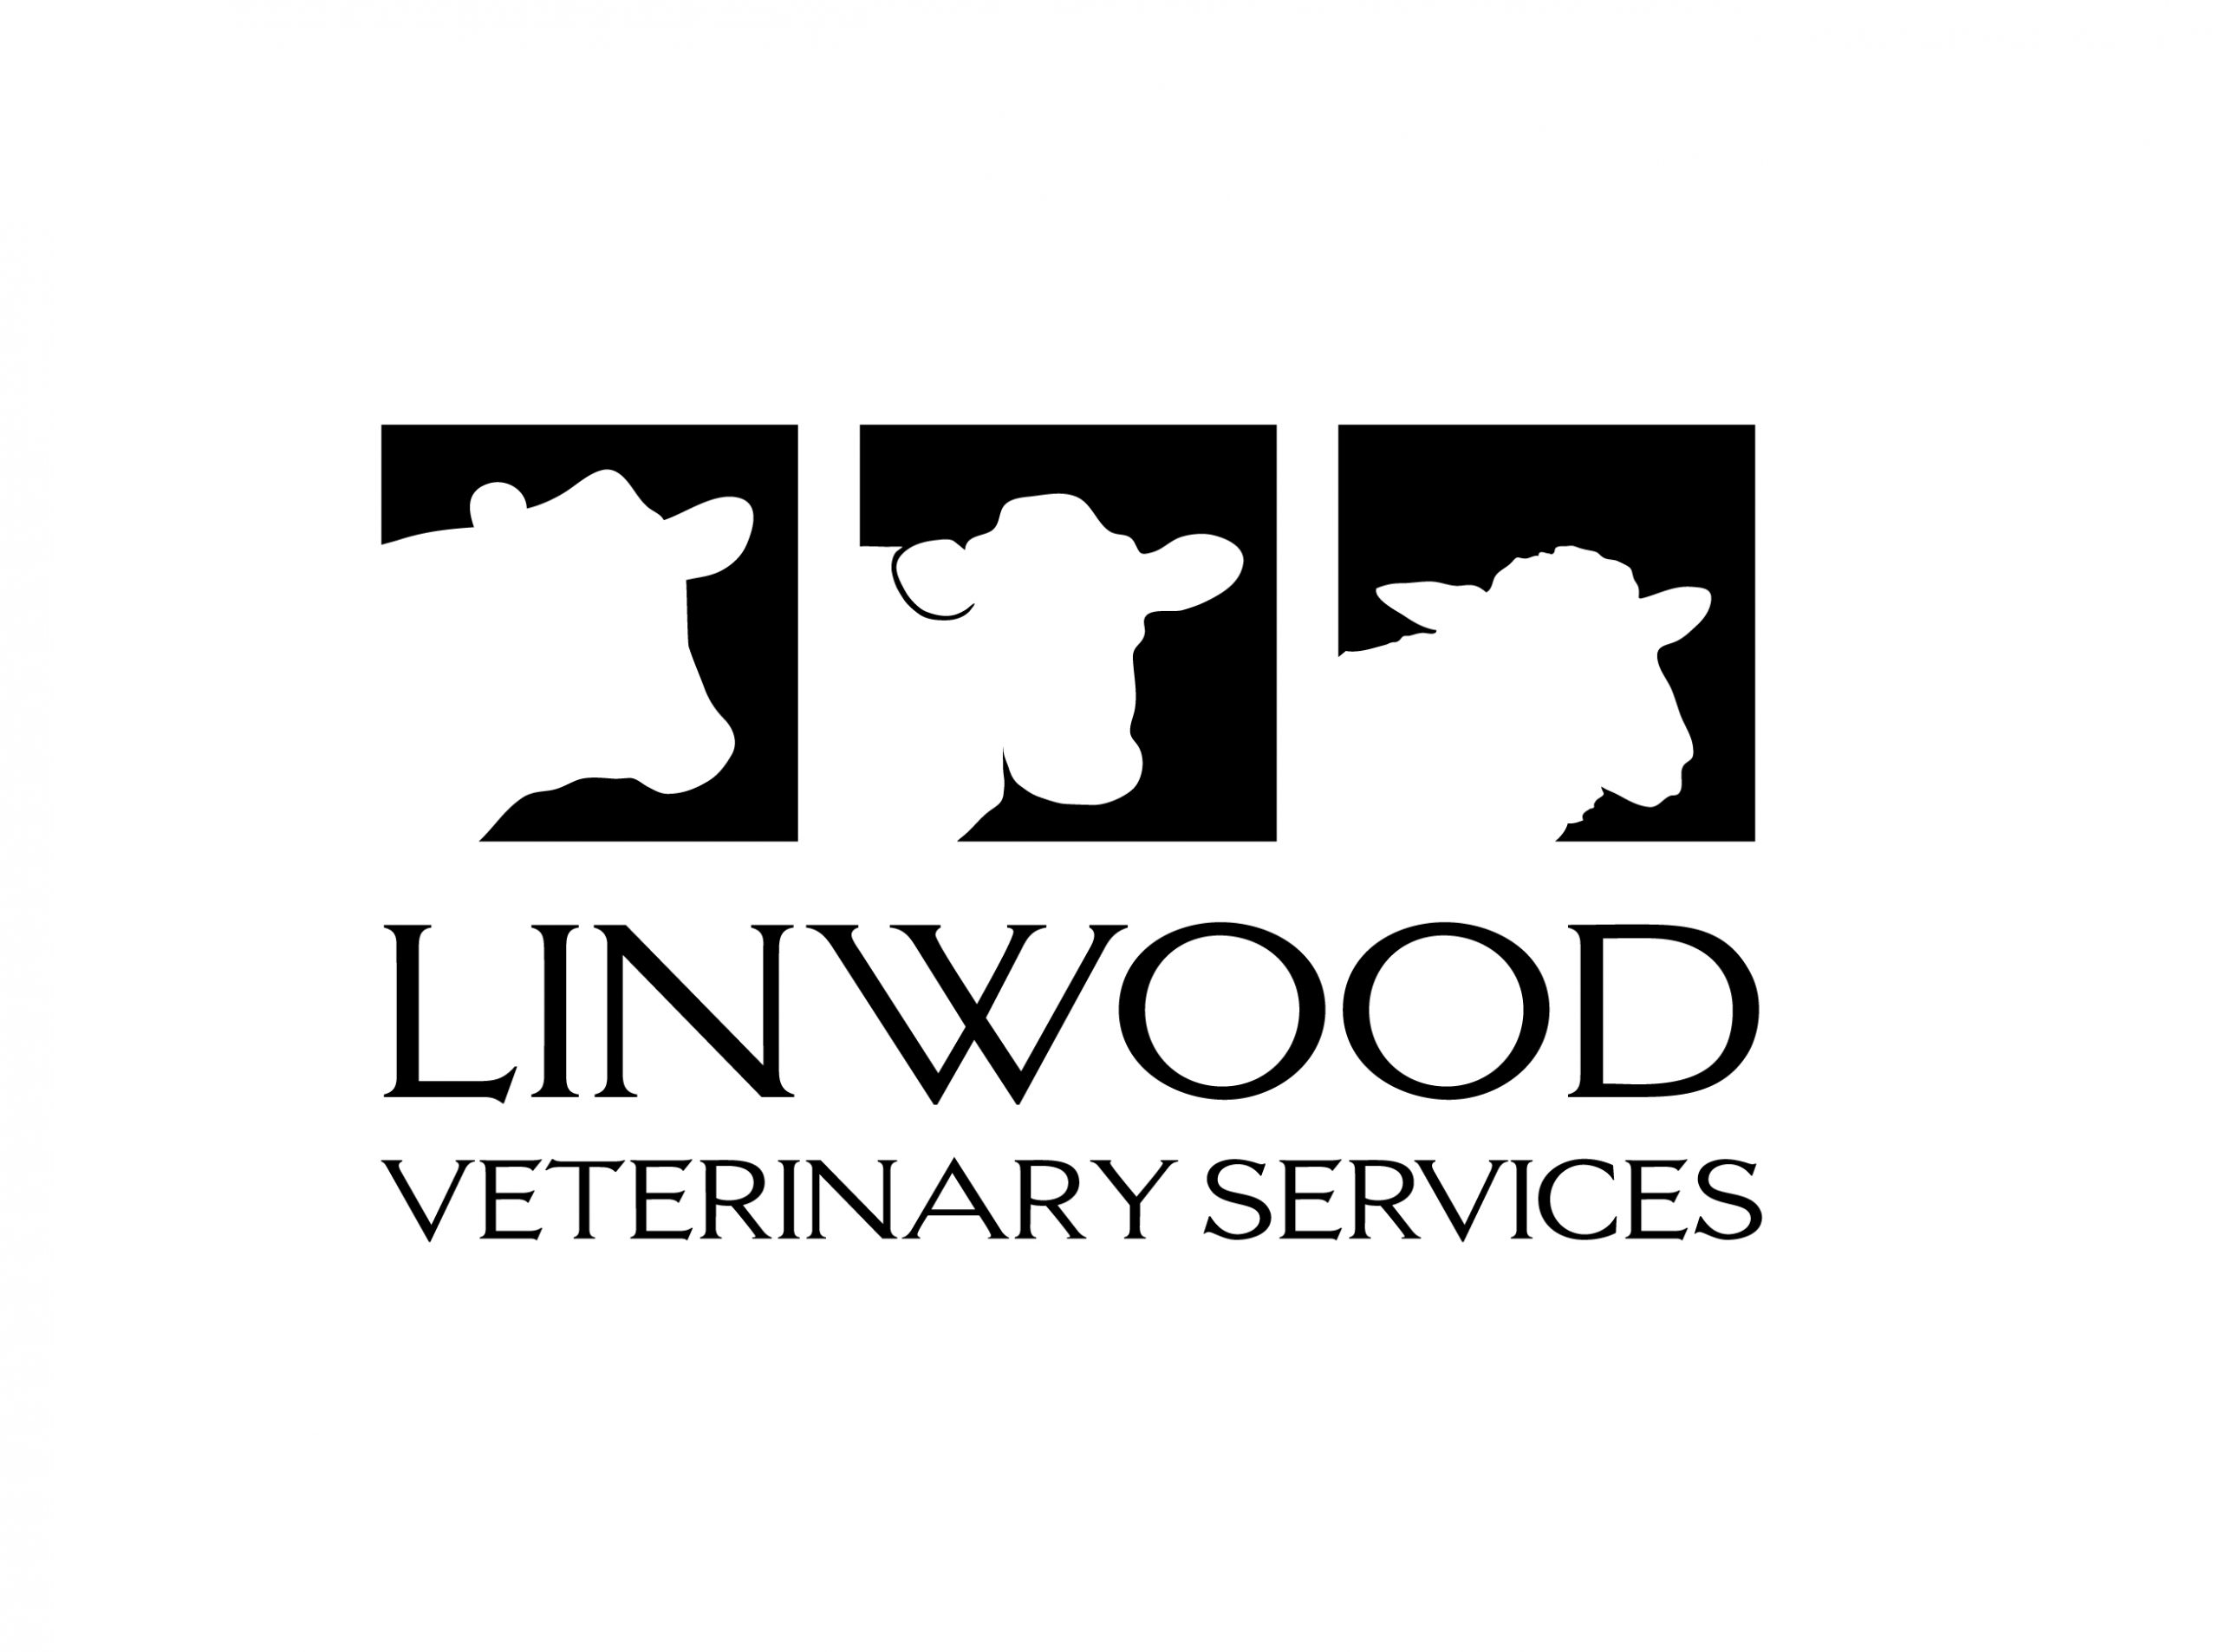 Linwood Veterinary Services